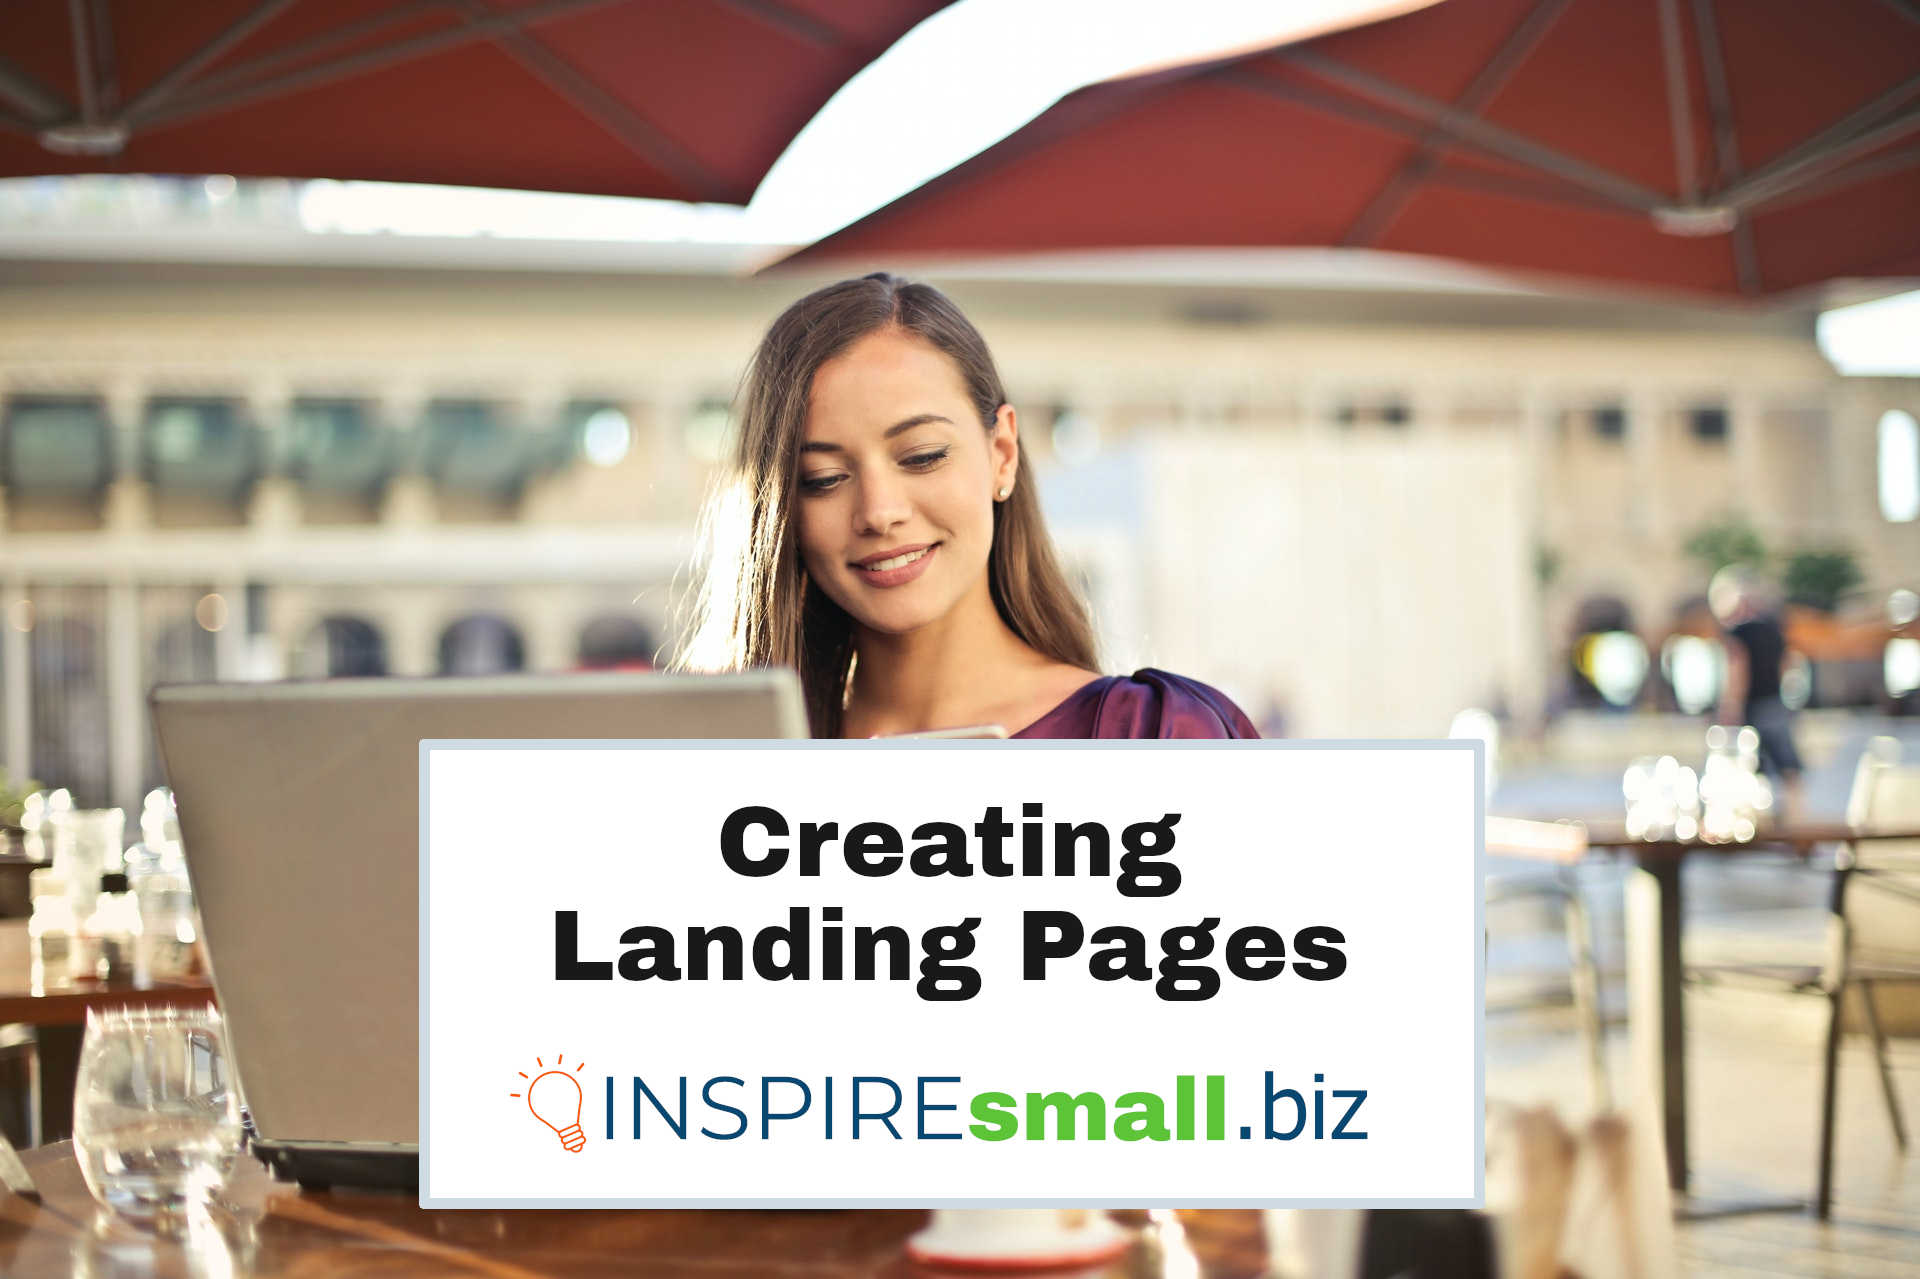 Creating Landing Pages, Business Building Guide from INSPIREsmall.biz